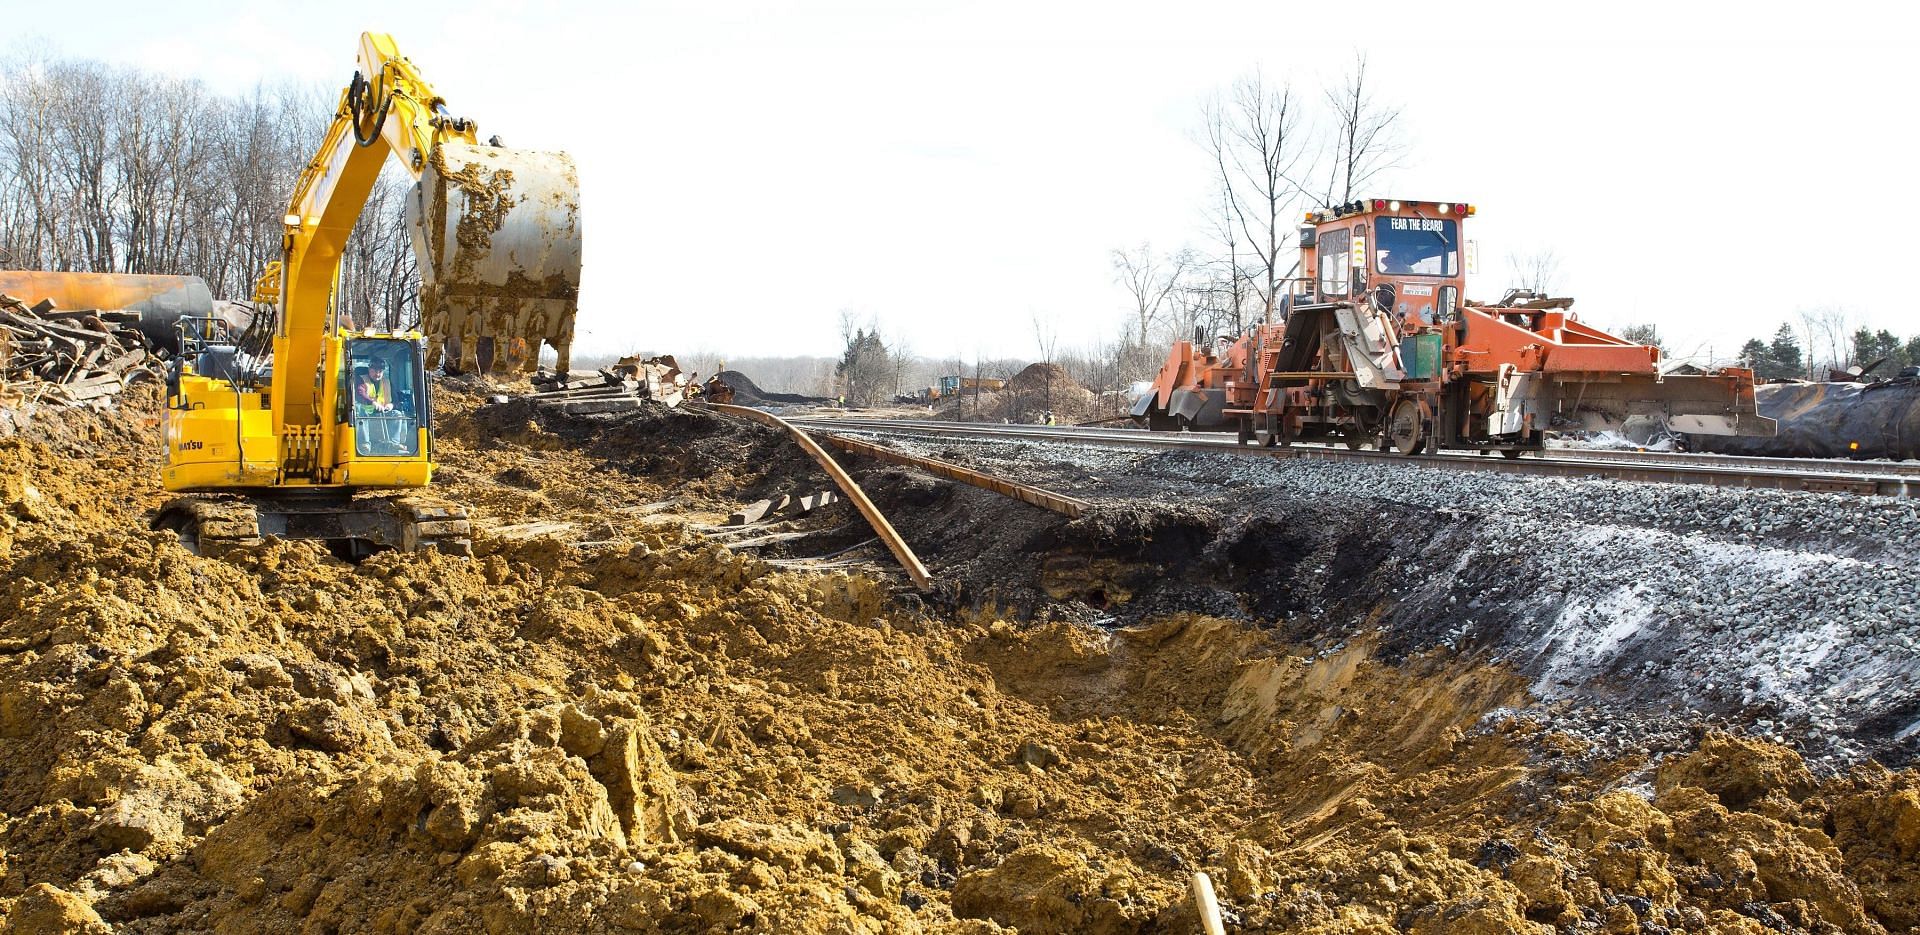 Cleanup efforts are reportedly underway in East Palestine (Image via Norfolk Southern/Twitter)